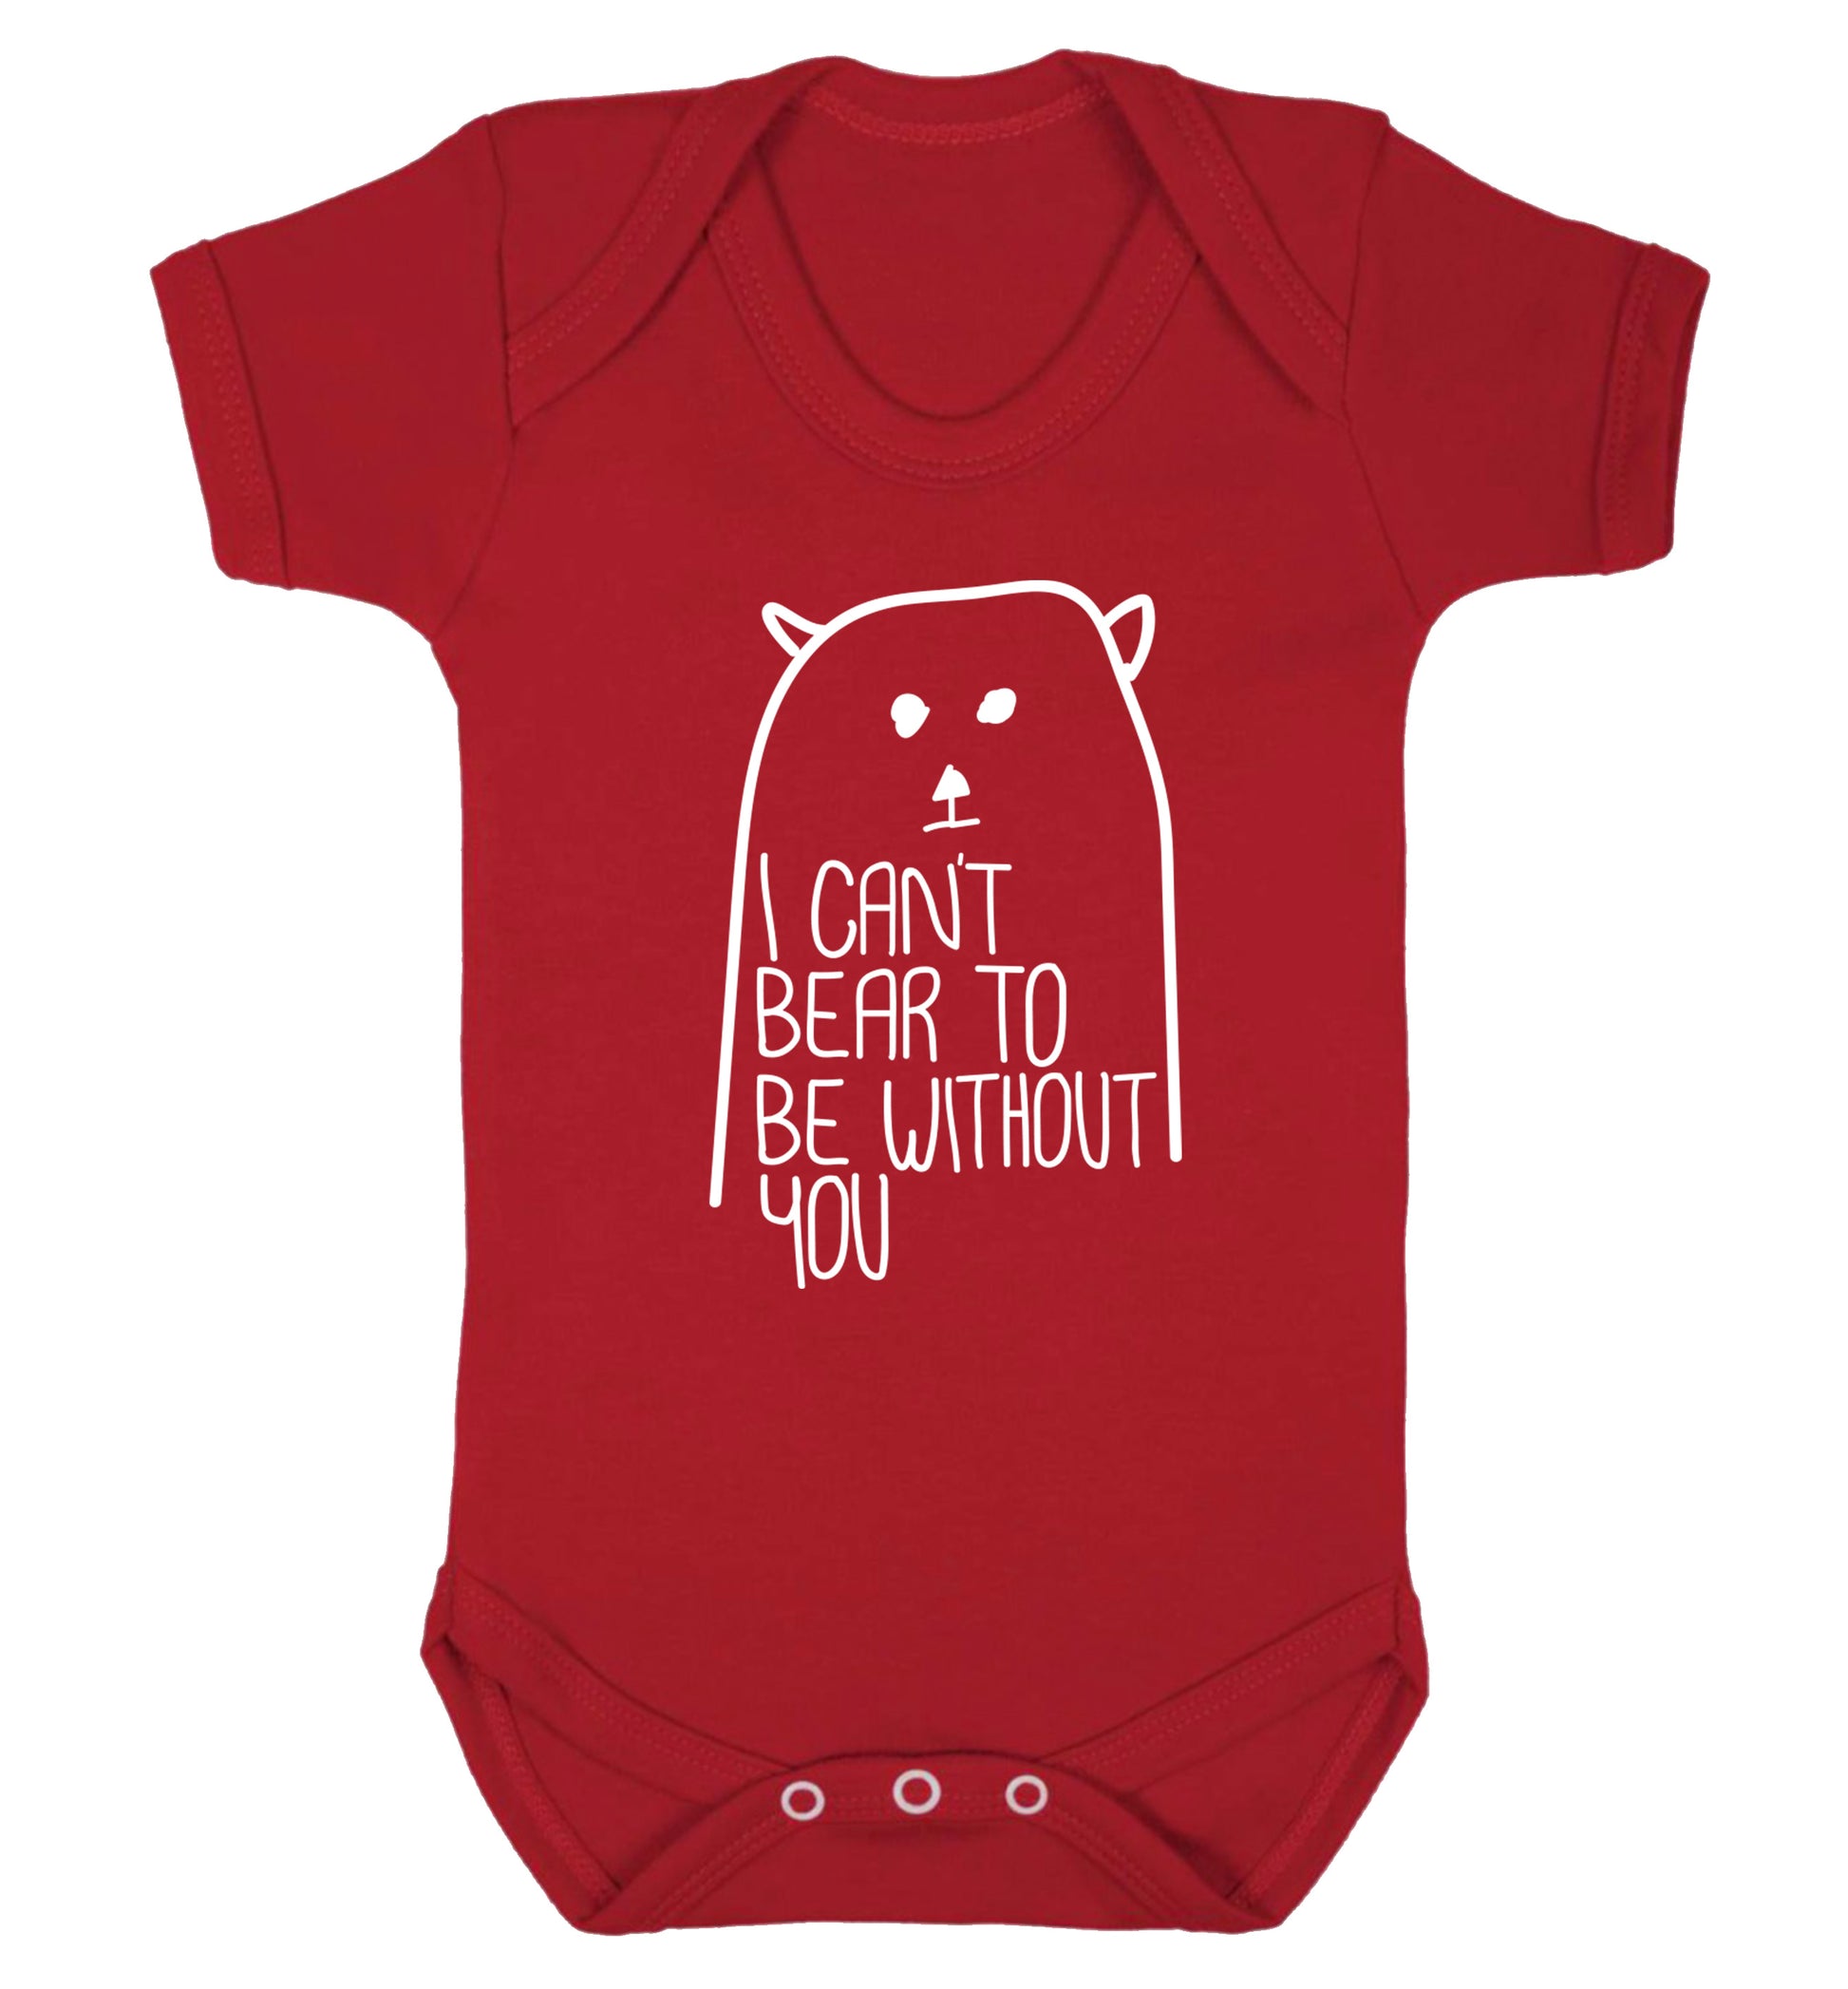 I can't bear to be without you Baby Vest red 18-24 months